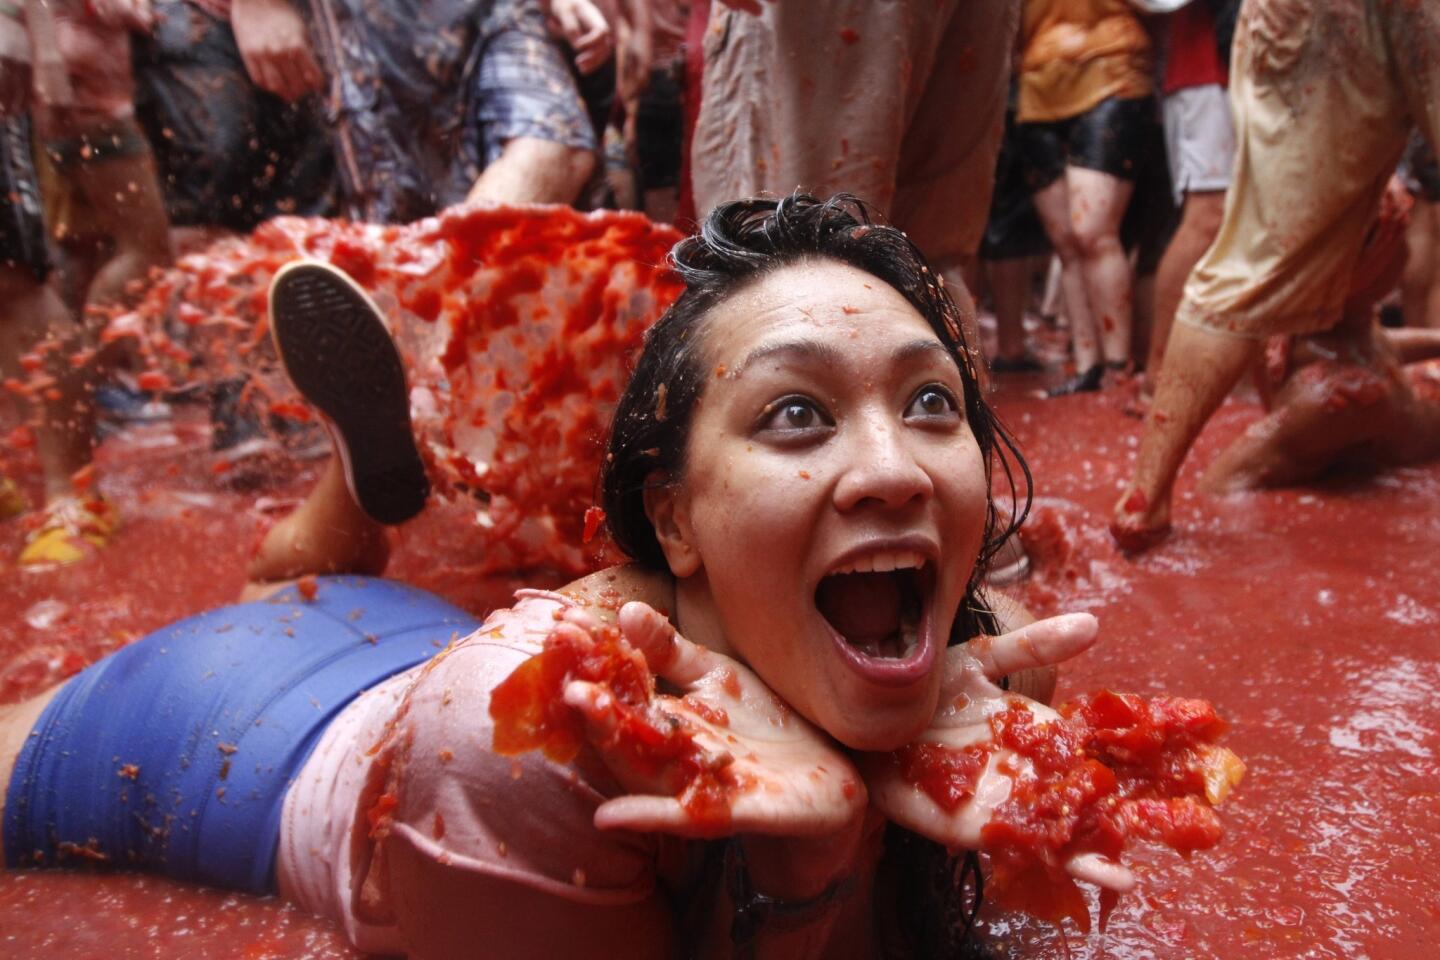 A participant in La Tomatina lies in a pool of tomatoes.